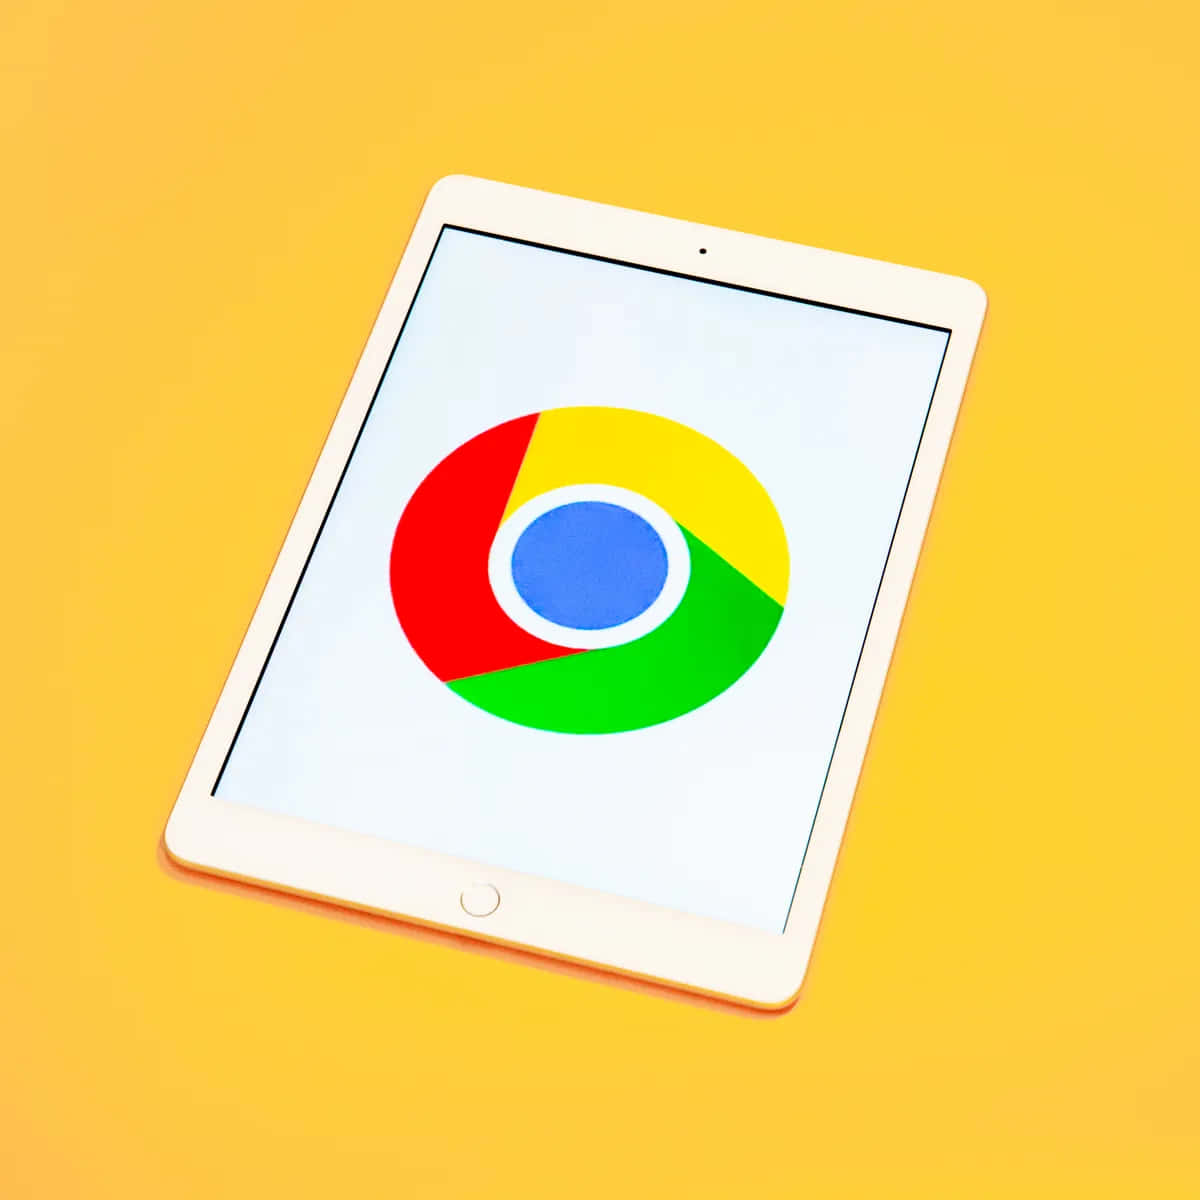 Chrome Browser on a Laptop